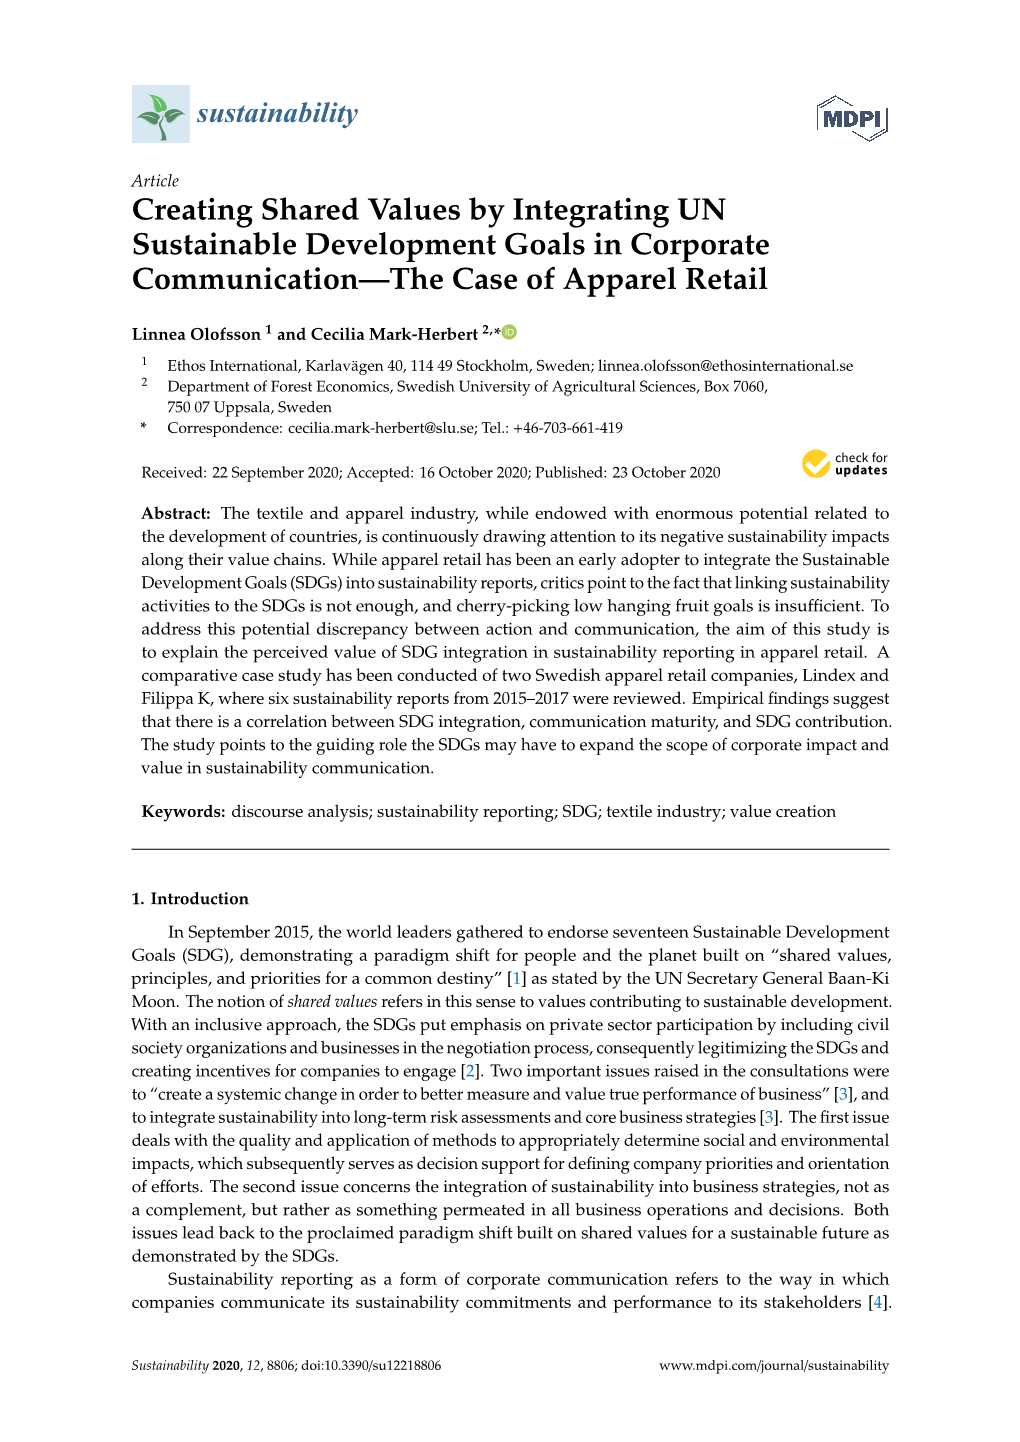 Creating Shared Values by Integrating UN Sustainable Development Goals in Corporate Communication—The Case of Apparel Retail